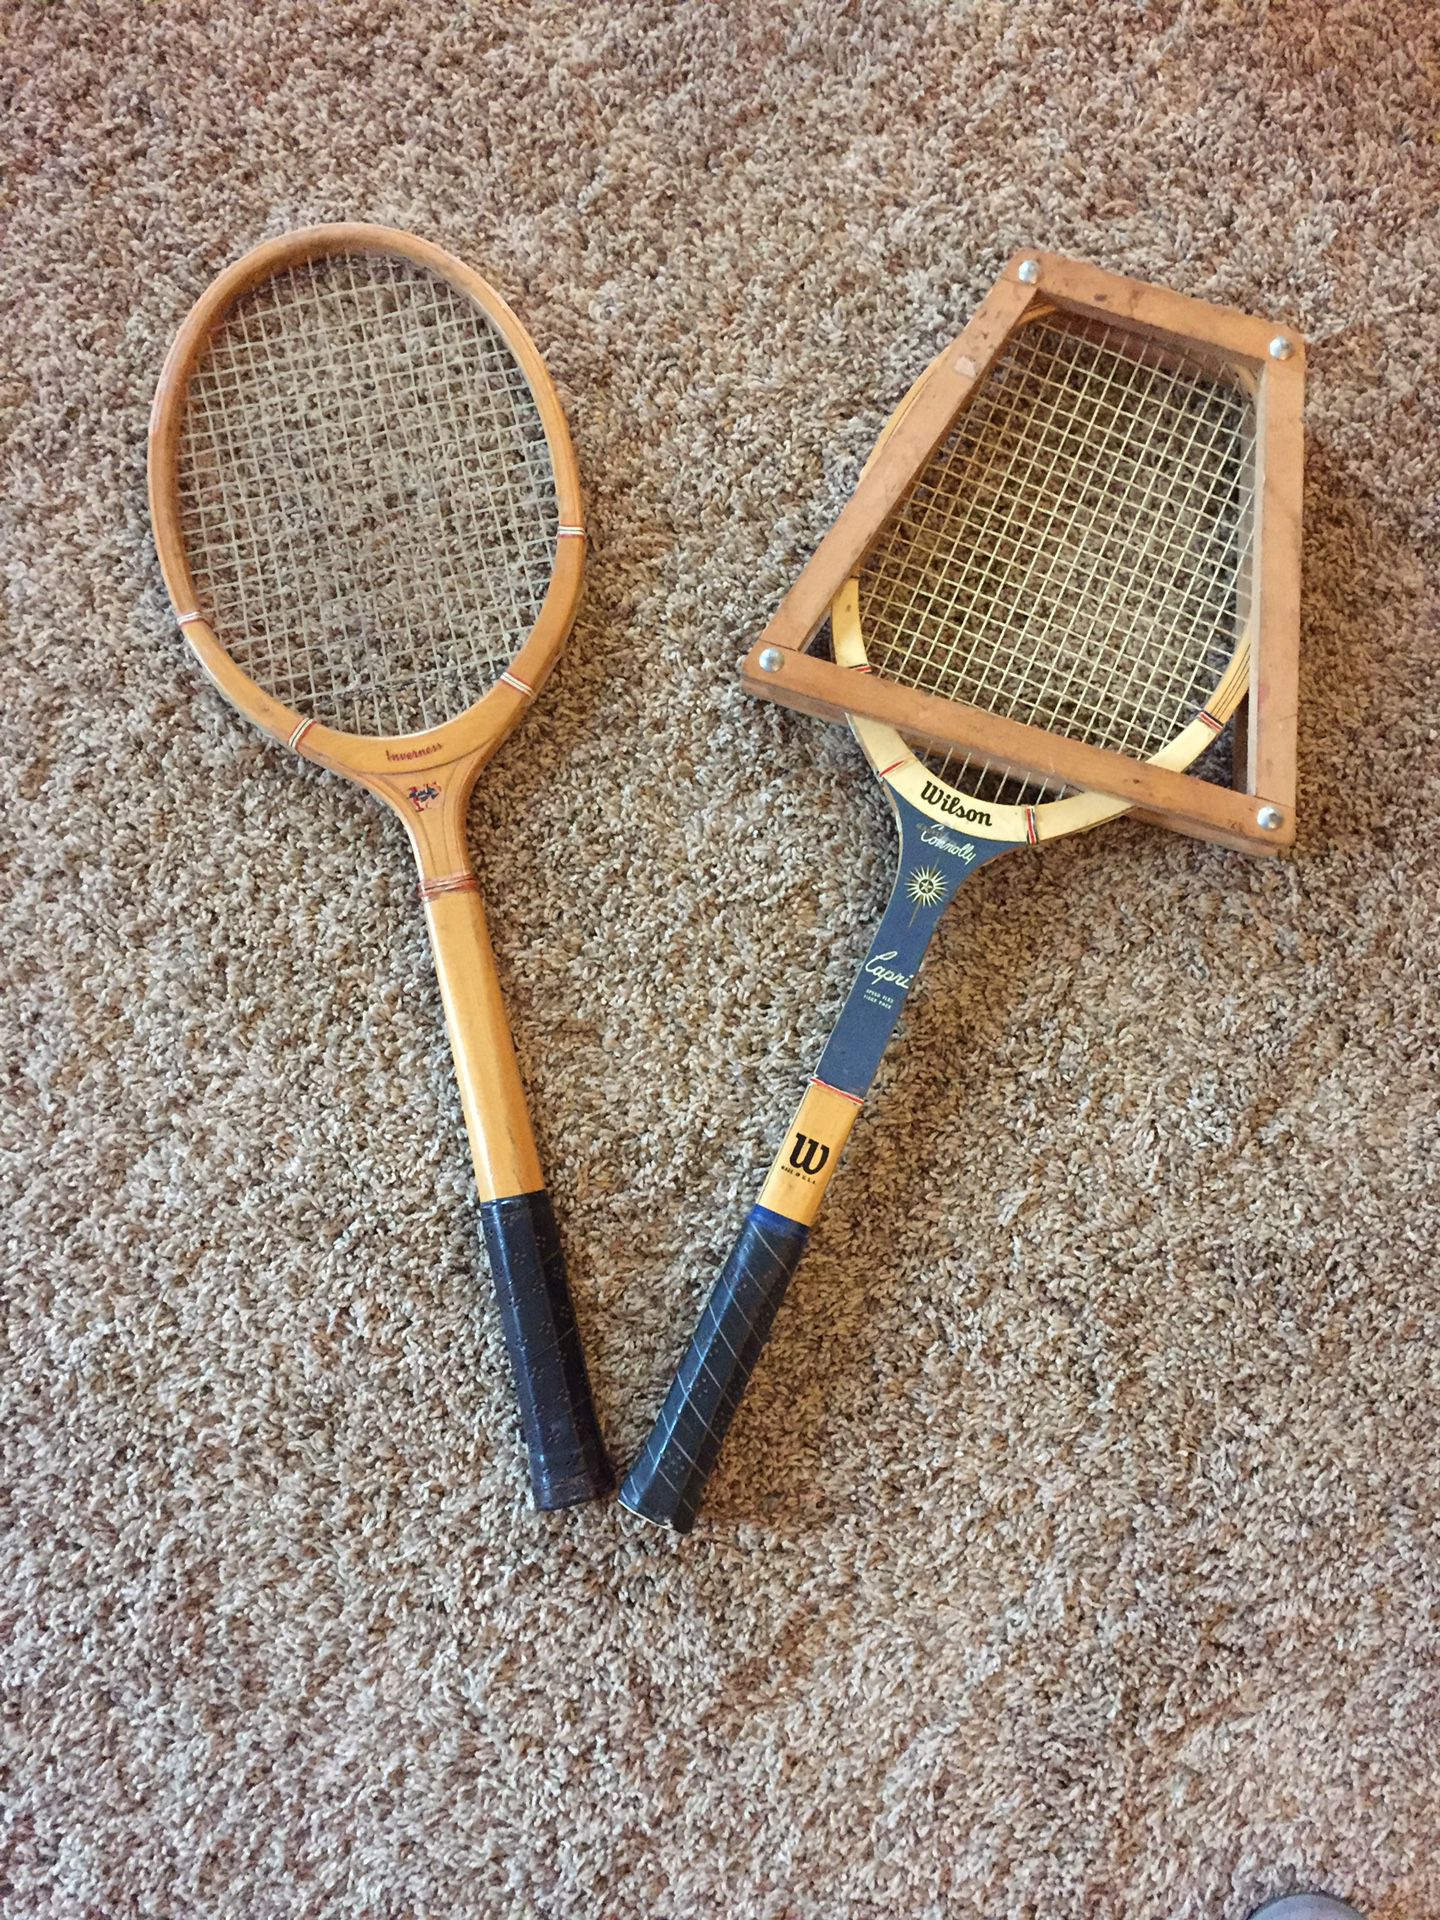 Old Wooden Tennis Rackets Great for decor